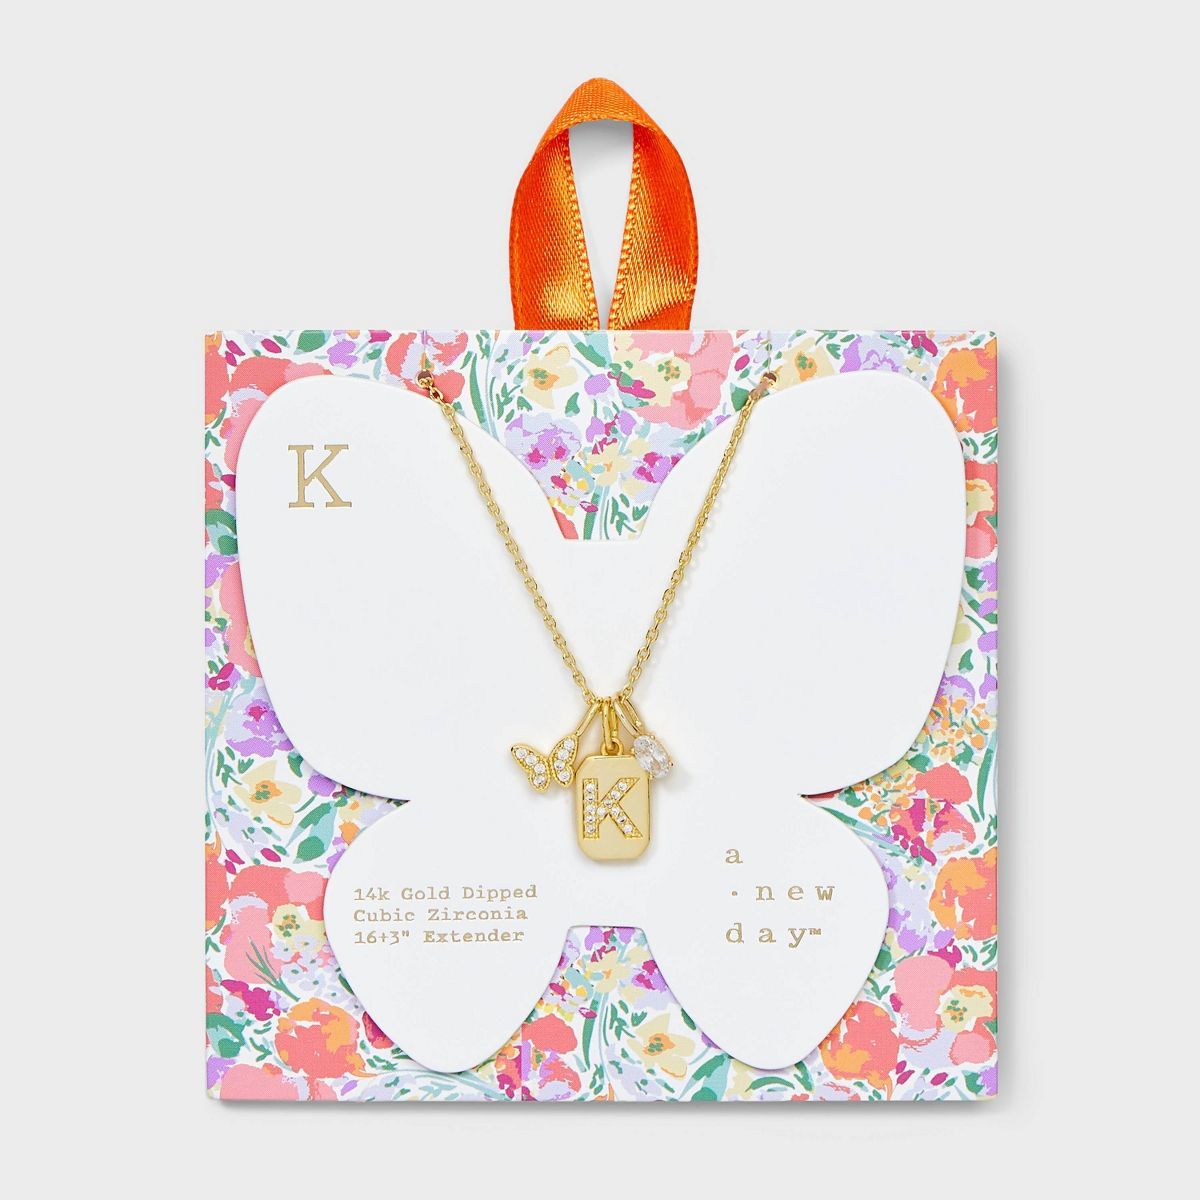 14K Gold Dipped Cubic Zirconia Initial "K" Butterfly Pendant Necklace - A New Day™ Gold | Target